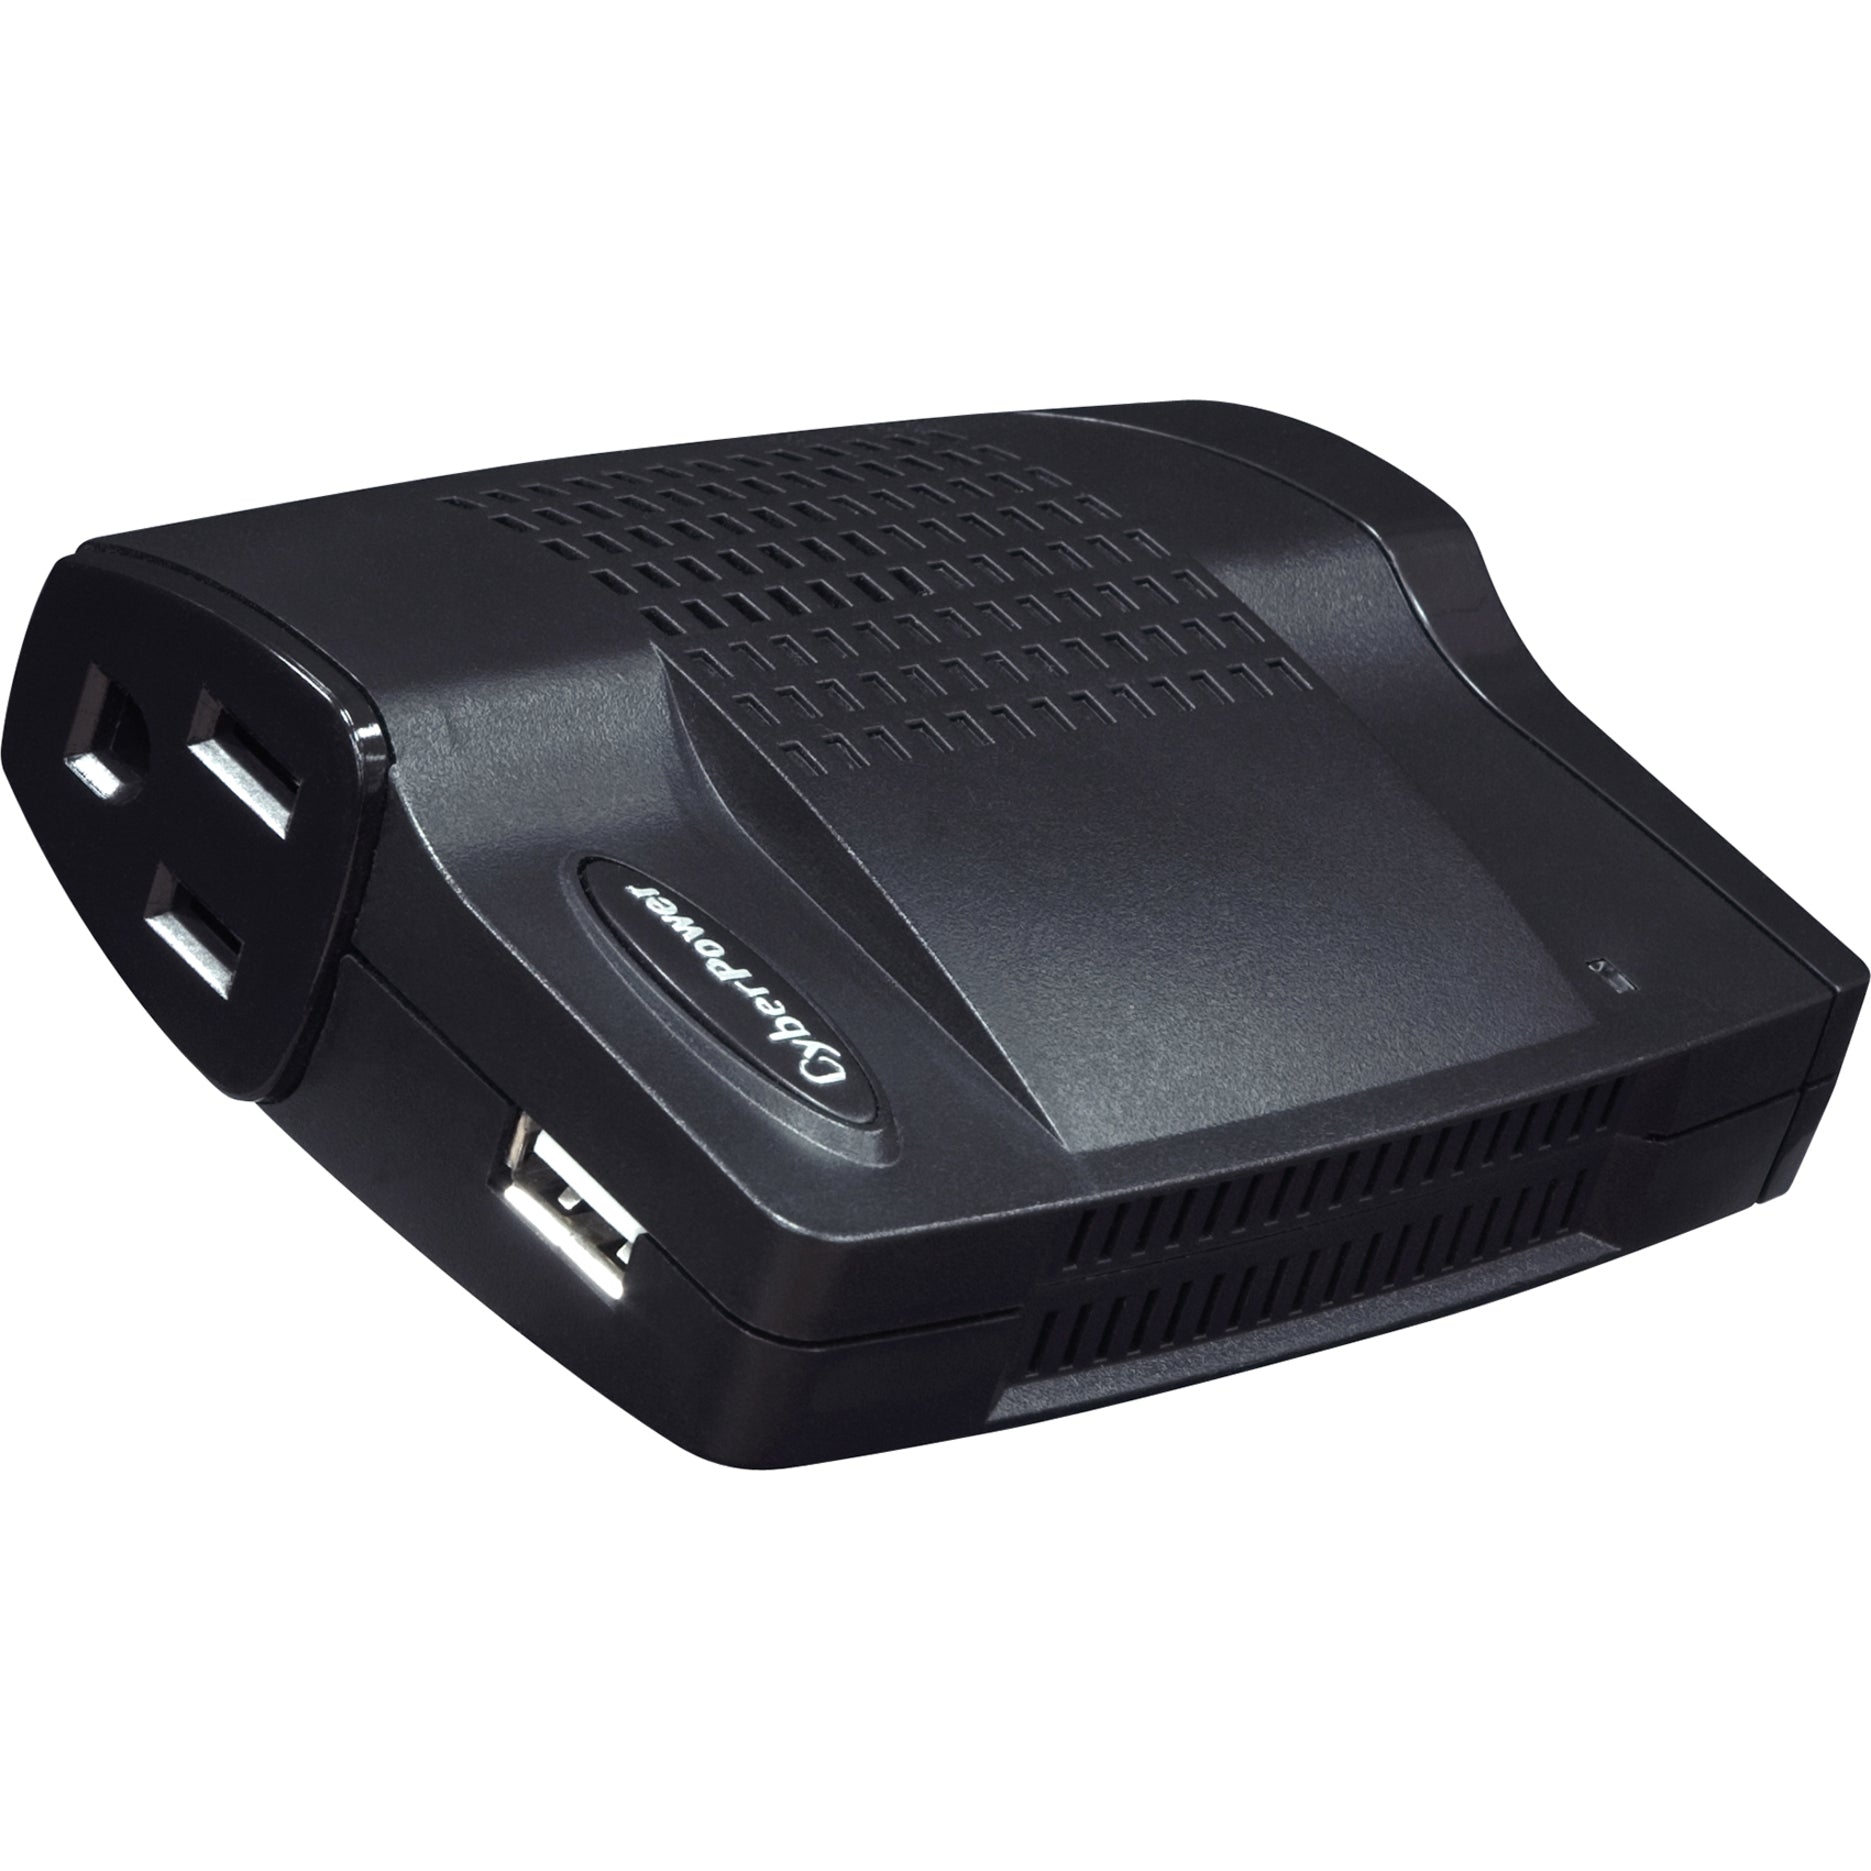 CyberPower CPS160SU-DC Mobile Power Inverter 160W with DC Out and USB Charger - Slim line, 12V DC Input, 5V DC/12V DC/120V AC Output